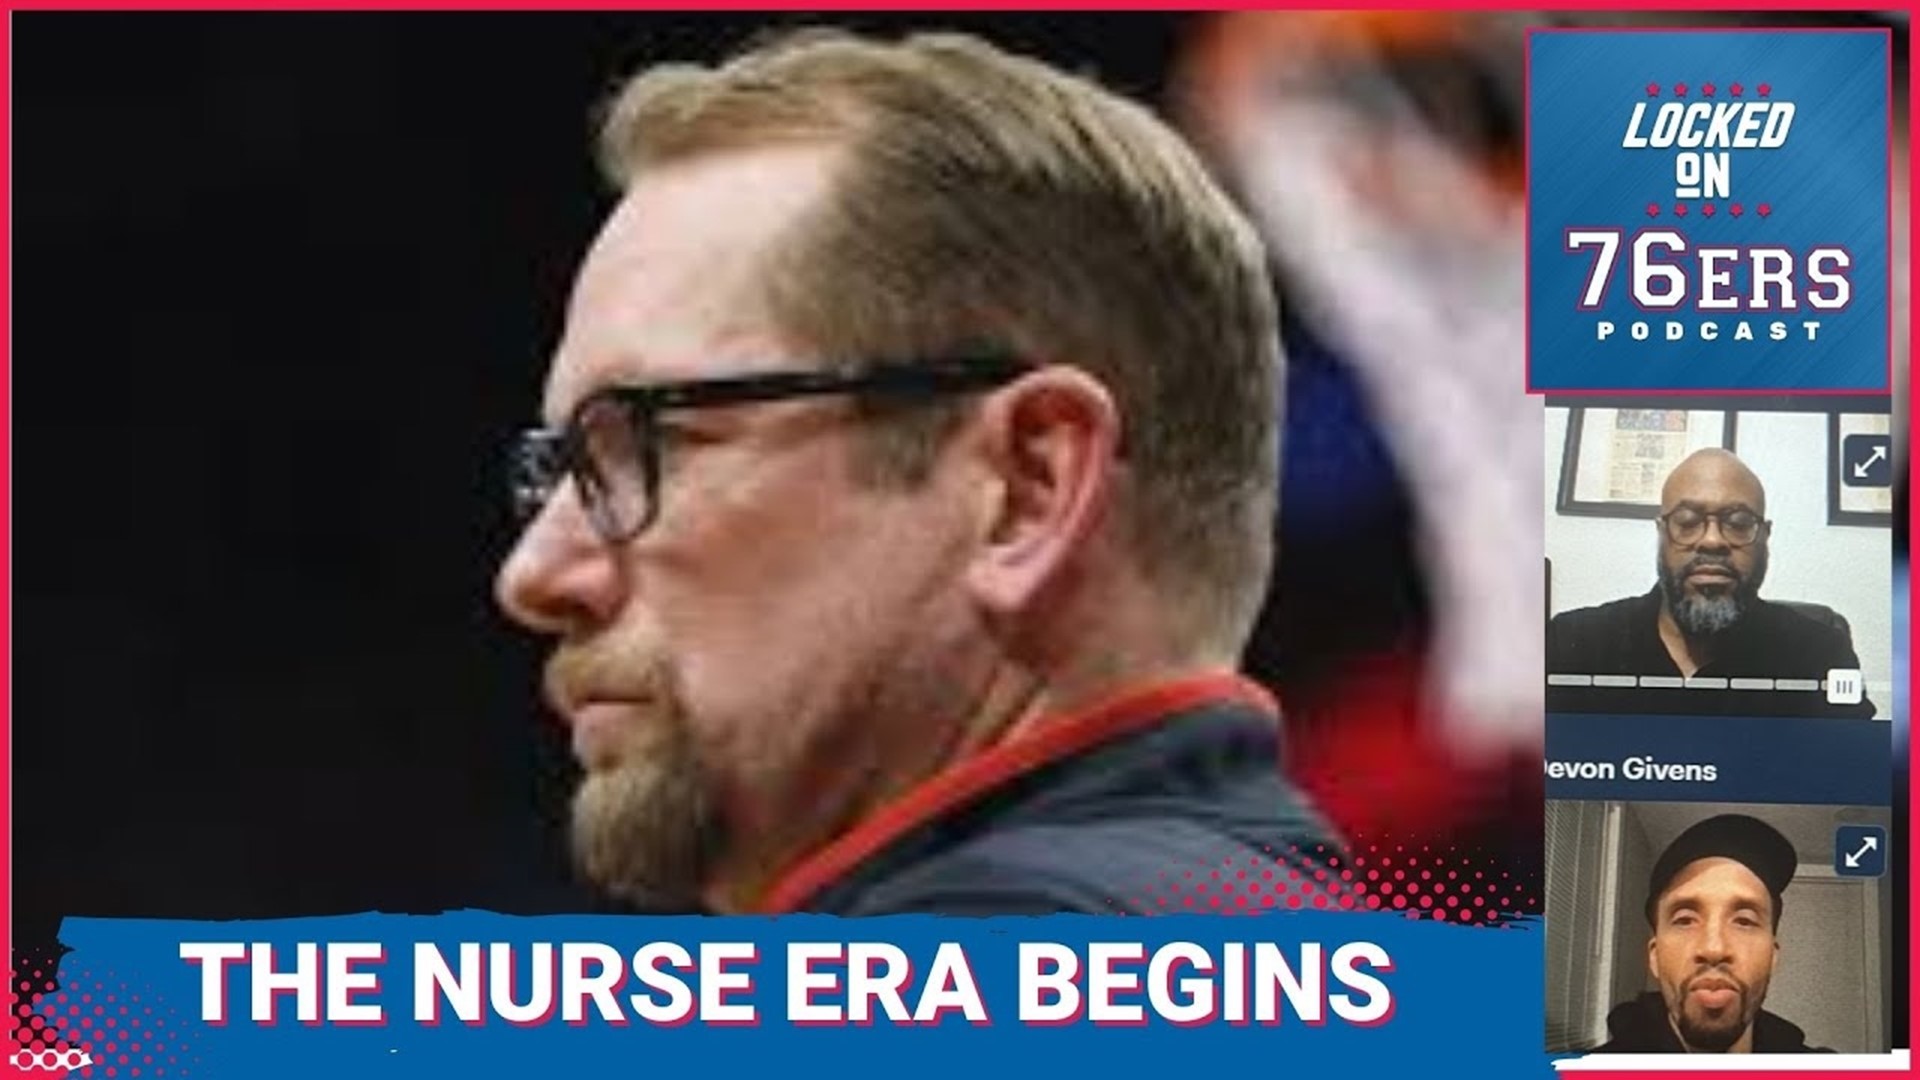 The 76ers will hire Nick Nurse as head coach. Devon Givens and Keith Pompey agree that Nurse was the best candidate for the job. Nurse has Joel Embiid's blessing.